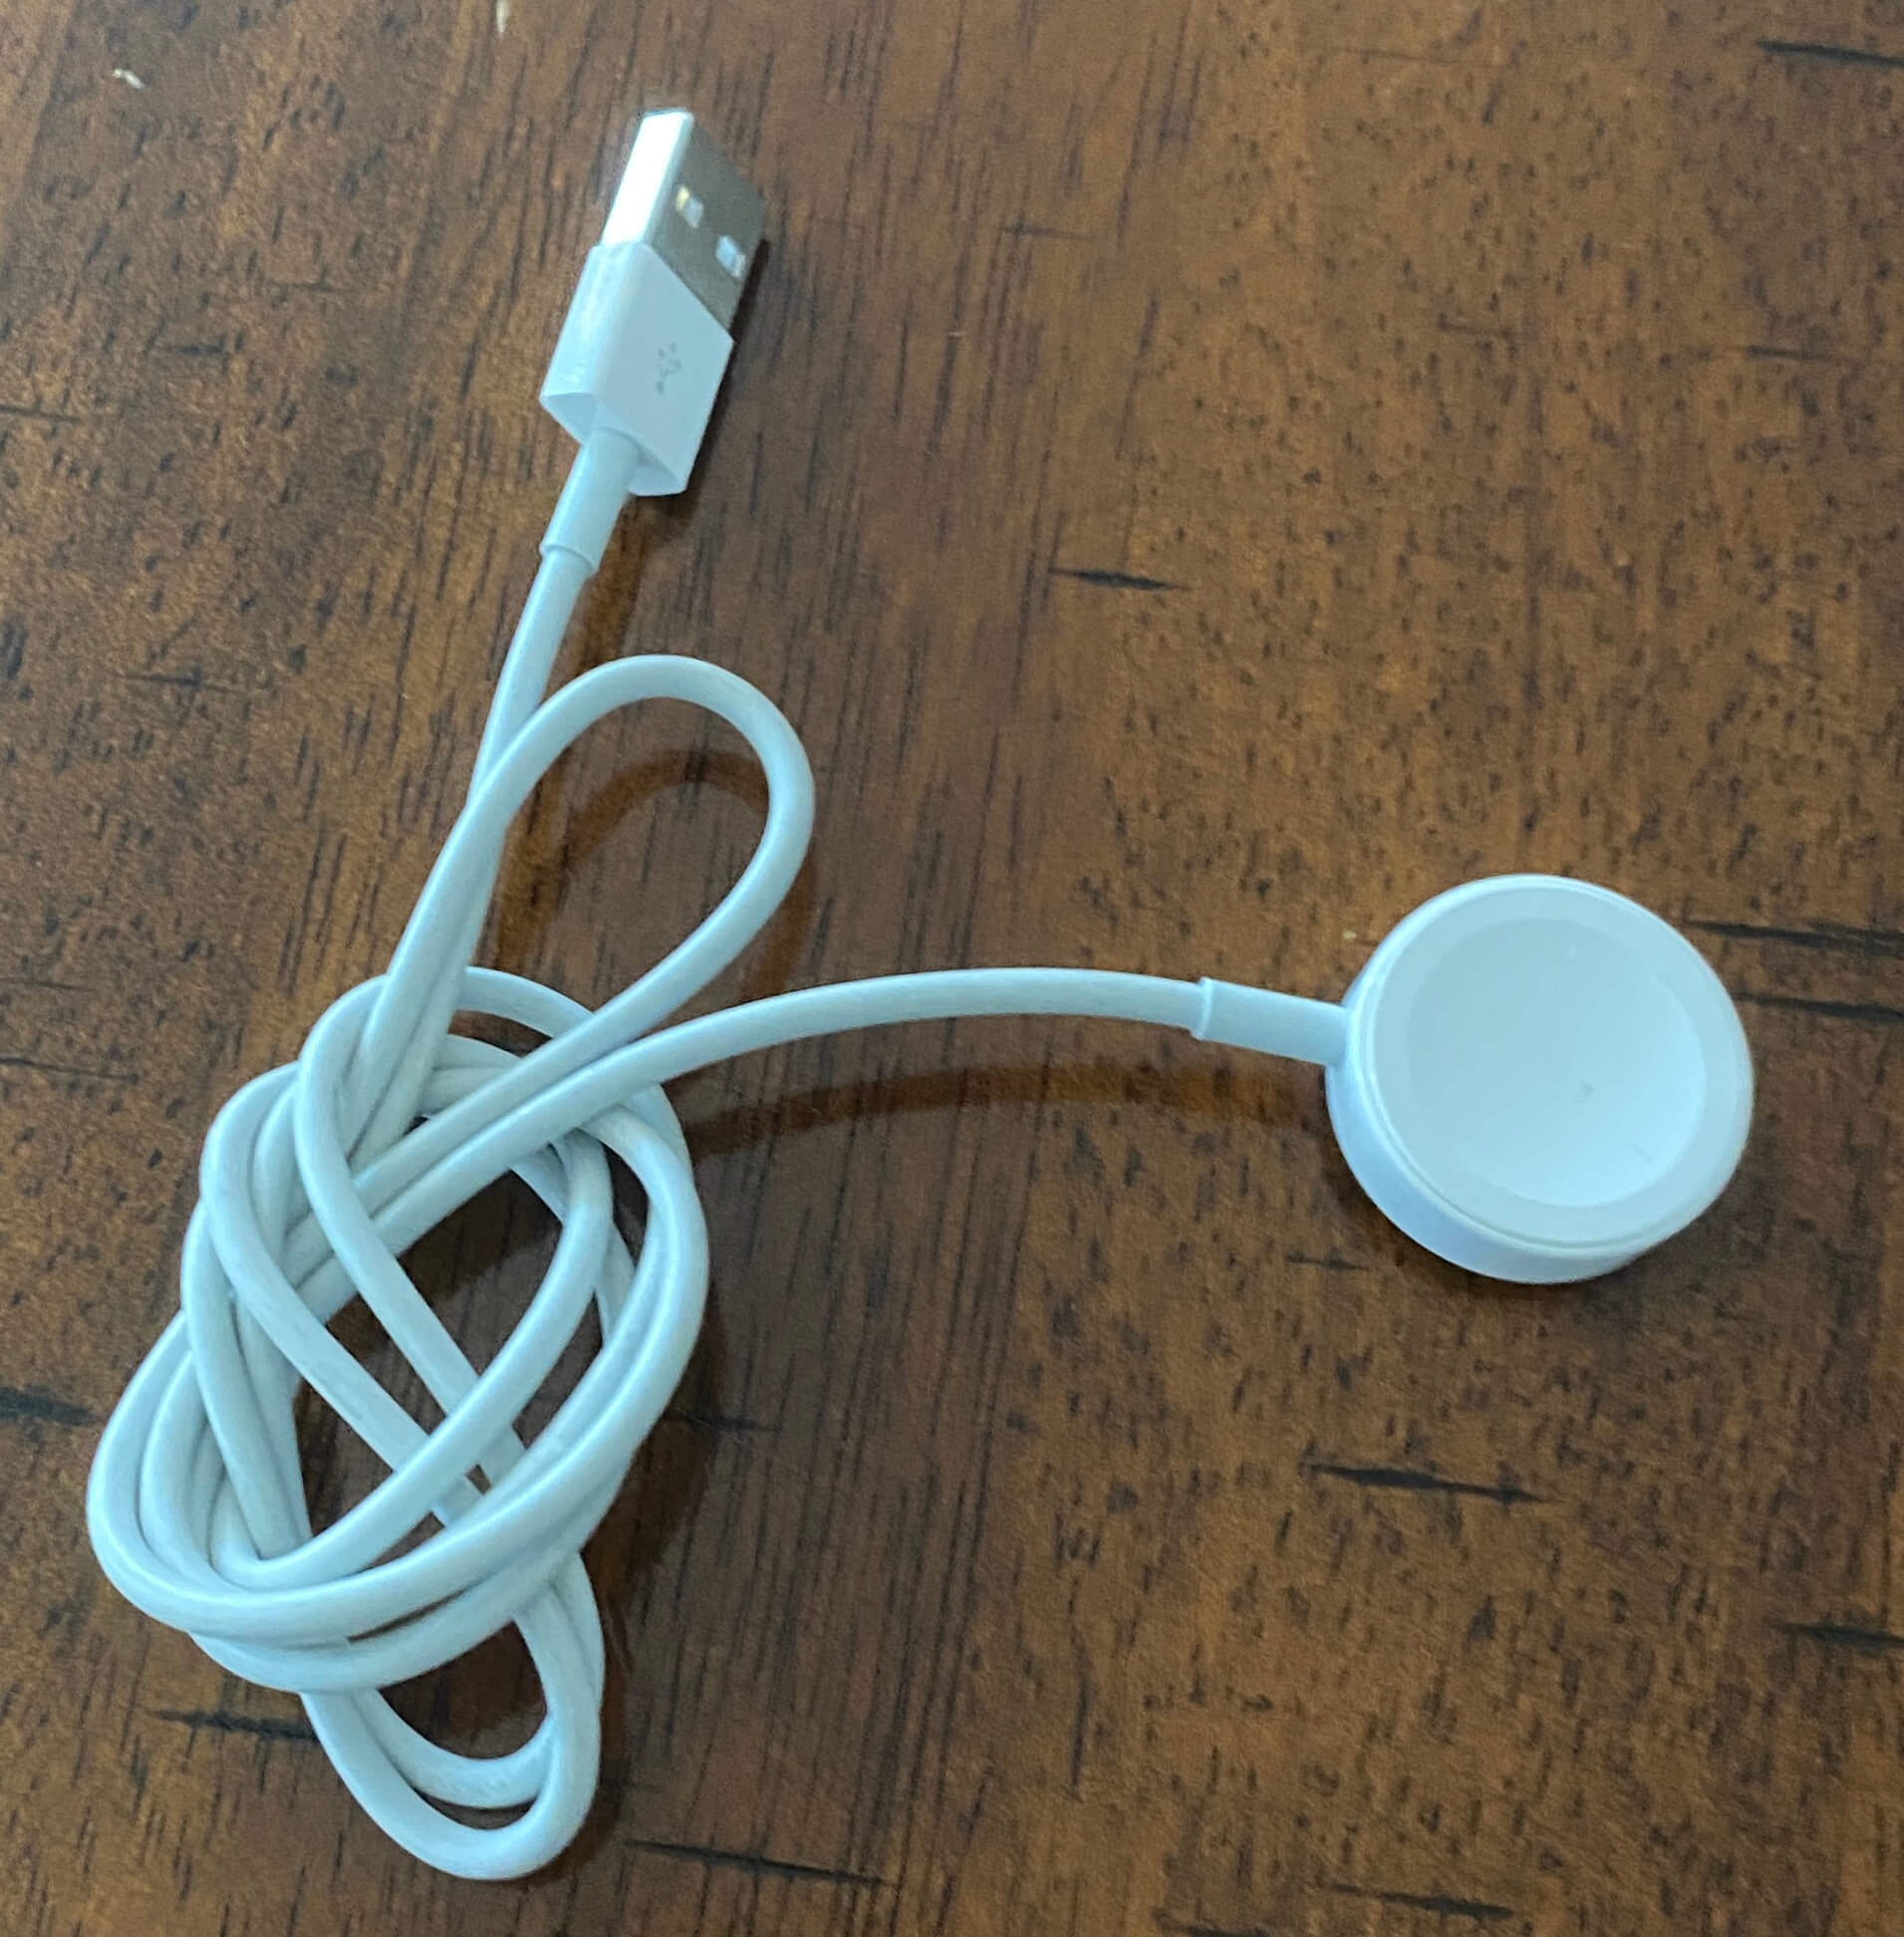 apple watch charging cable